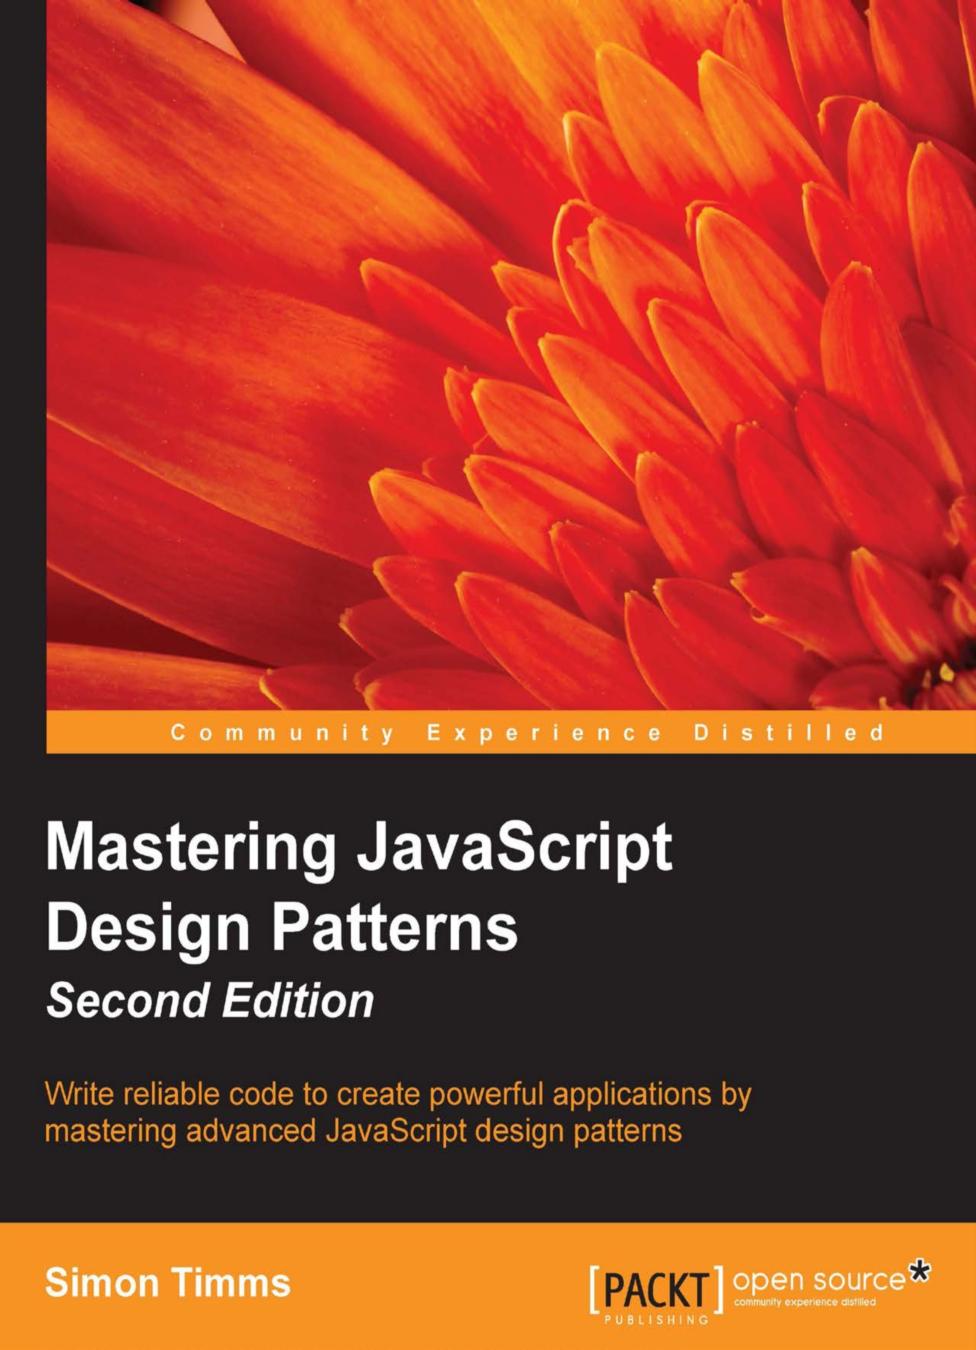 Mastering JavaScript Design Patterns - Second Edition by Simon Timms